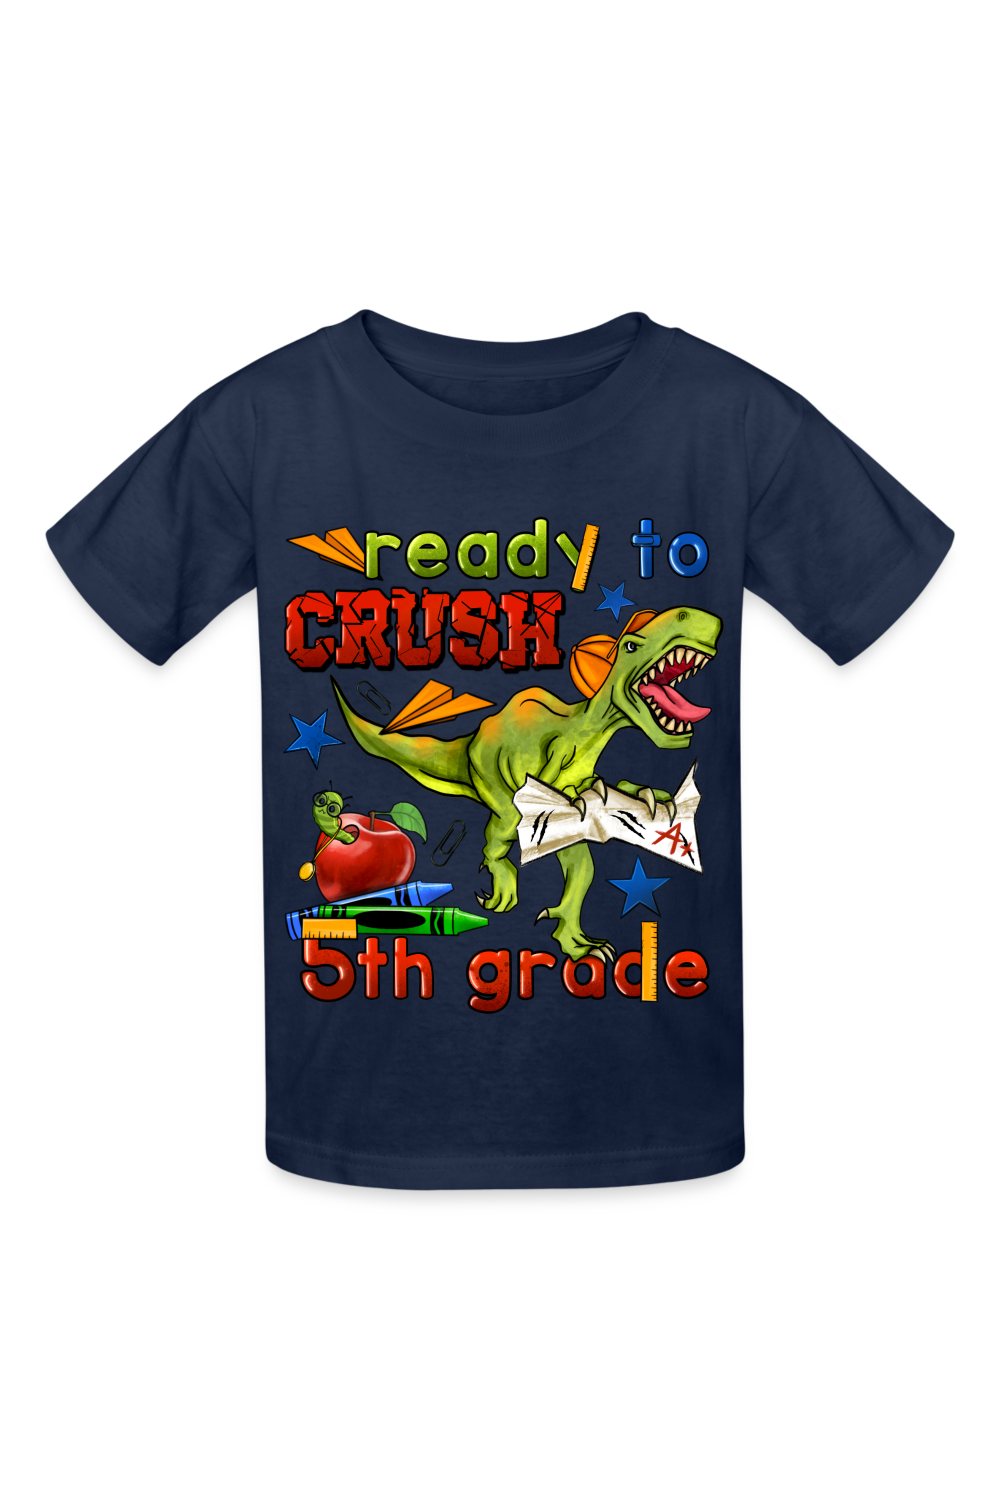 Boys Ready To Crush Fifth Grade Short Sleeve Tee Shirts for Back To School - navy - NicholesGifts.online